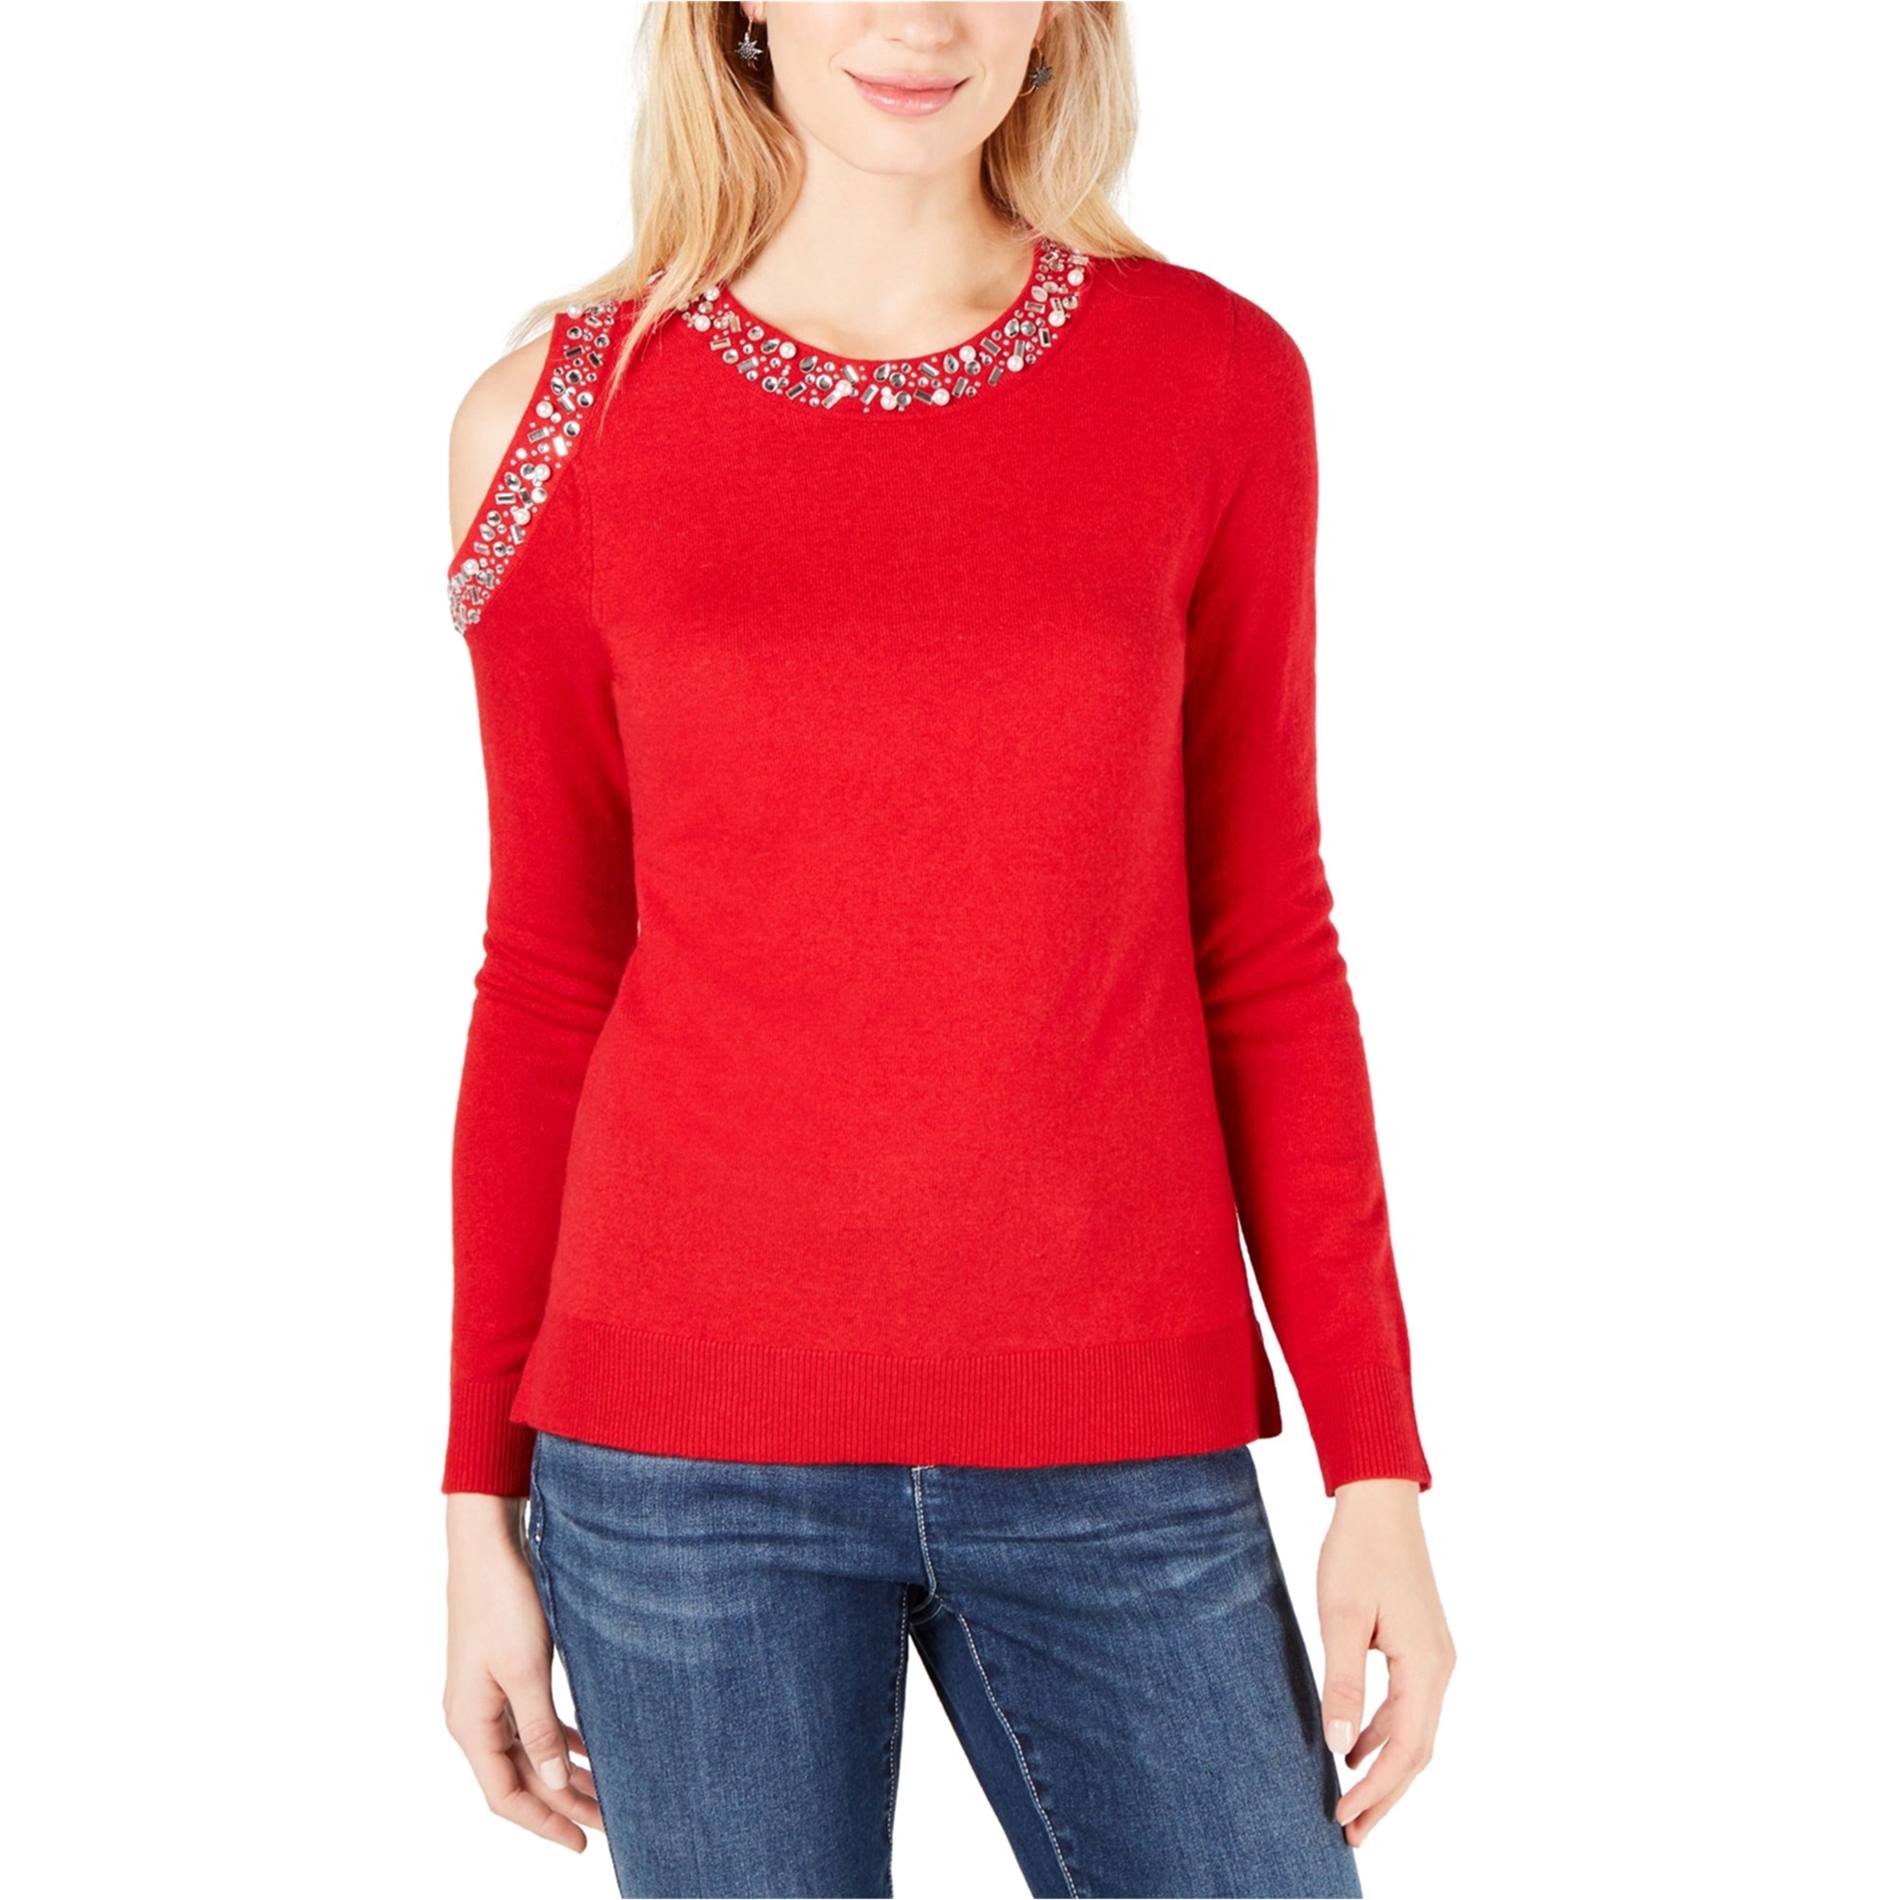 I-N-C Womens Embellished Pullover Sweater